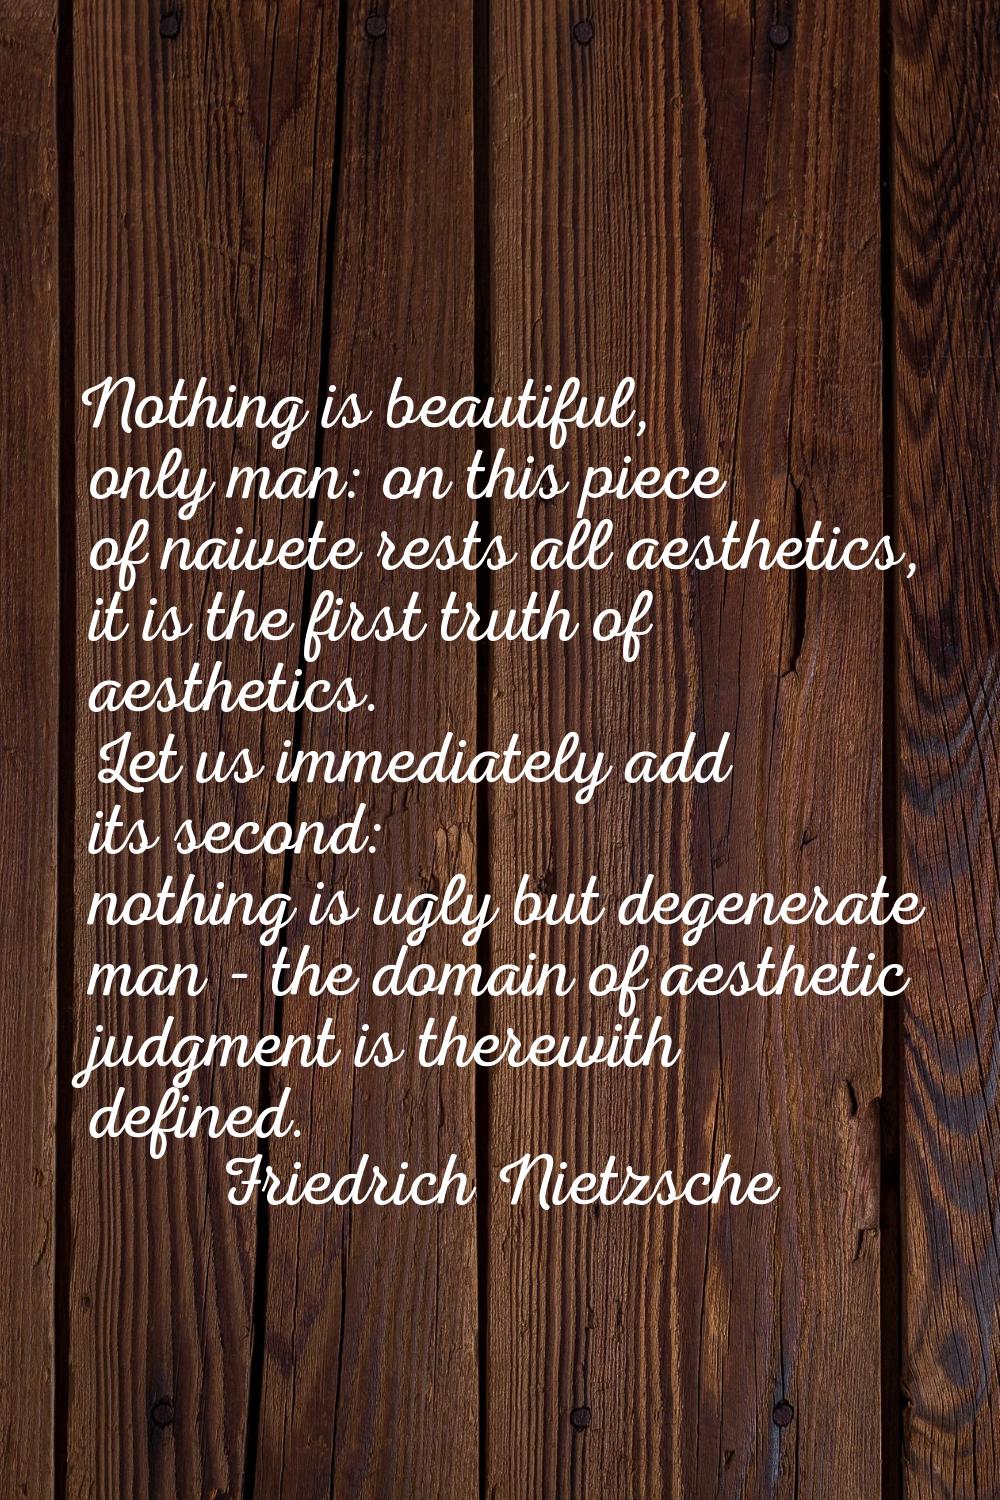 Nothing is beautiful, only man: on this piece of naivete rests all aesthetics, it is the first trut